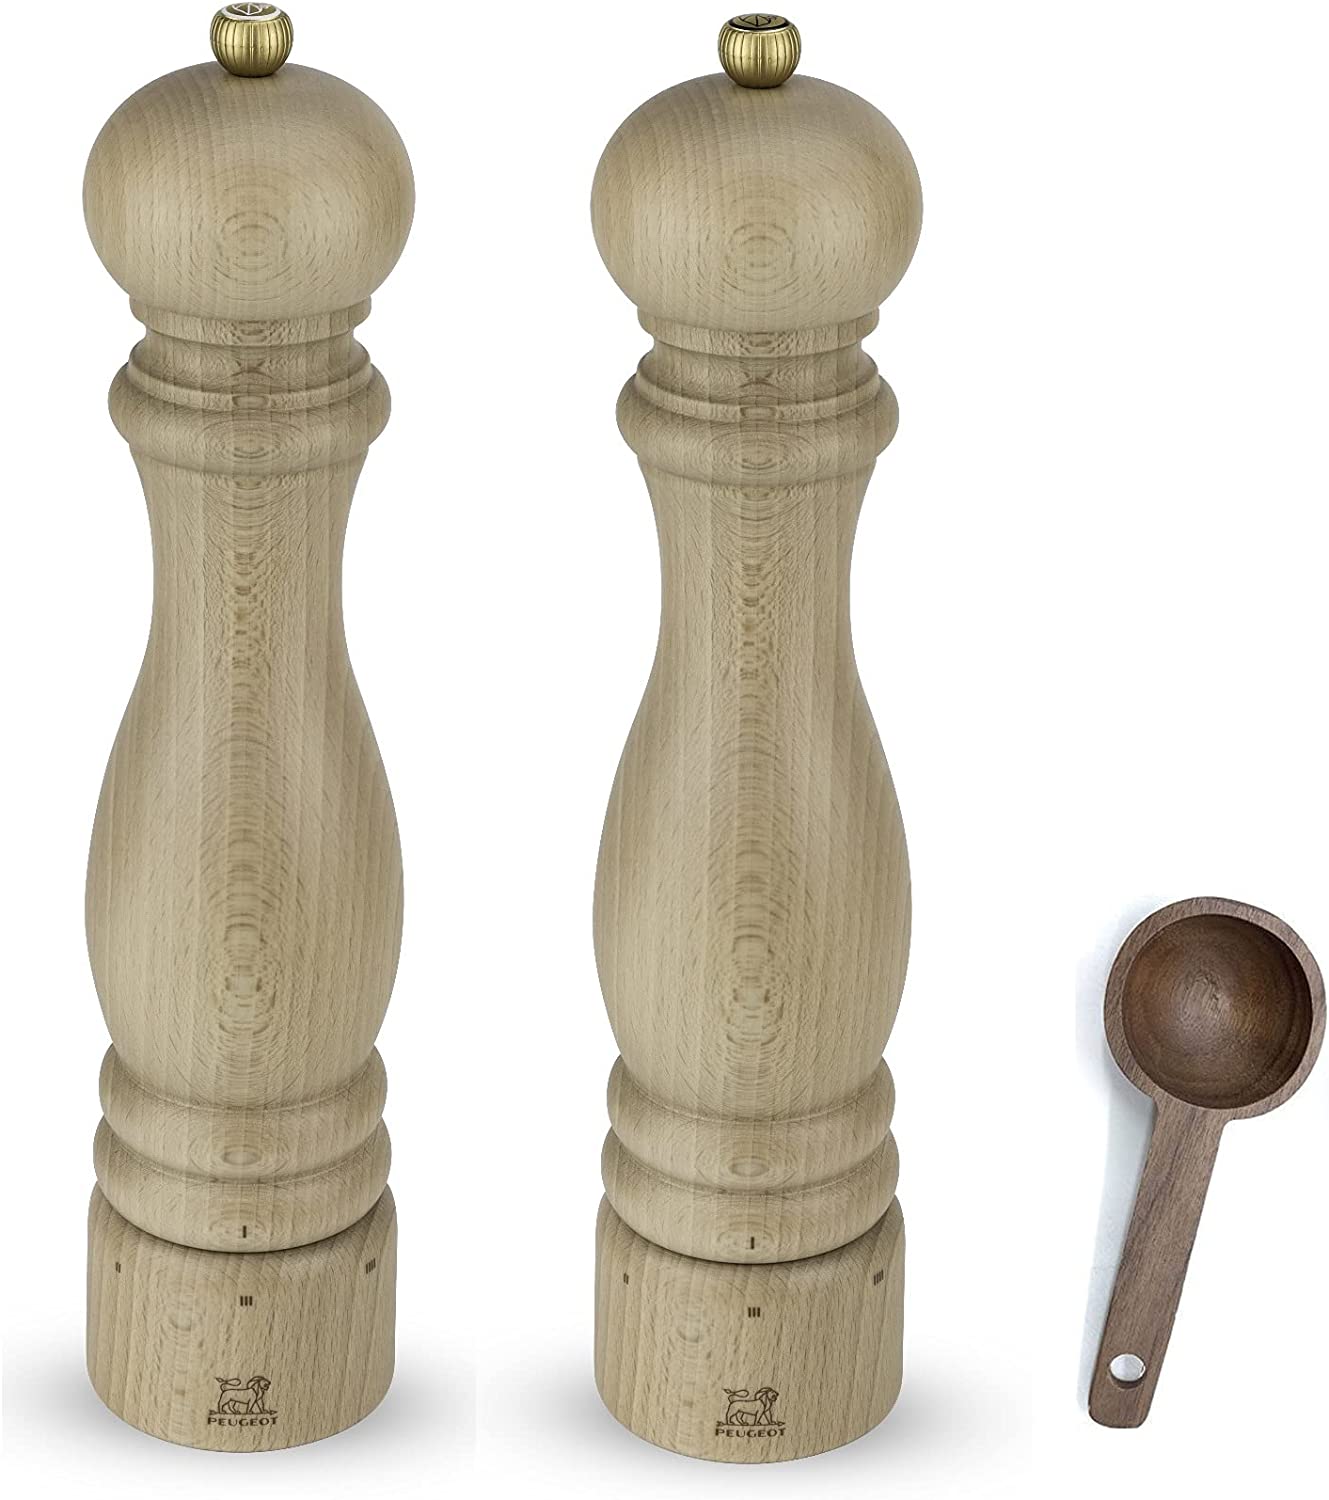 Peugeot Paris u'Select Salt &amp; Pepper Mill Gift Set Natural -With Wooden Spice Scoop (12 Inch) parallel imported goods 